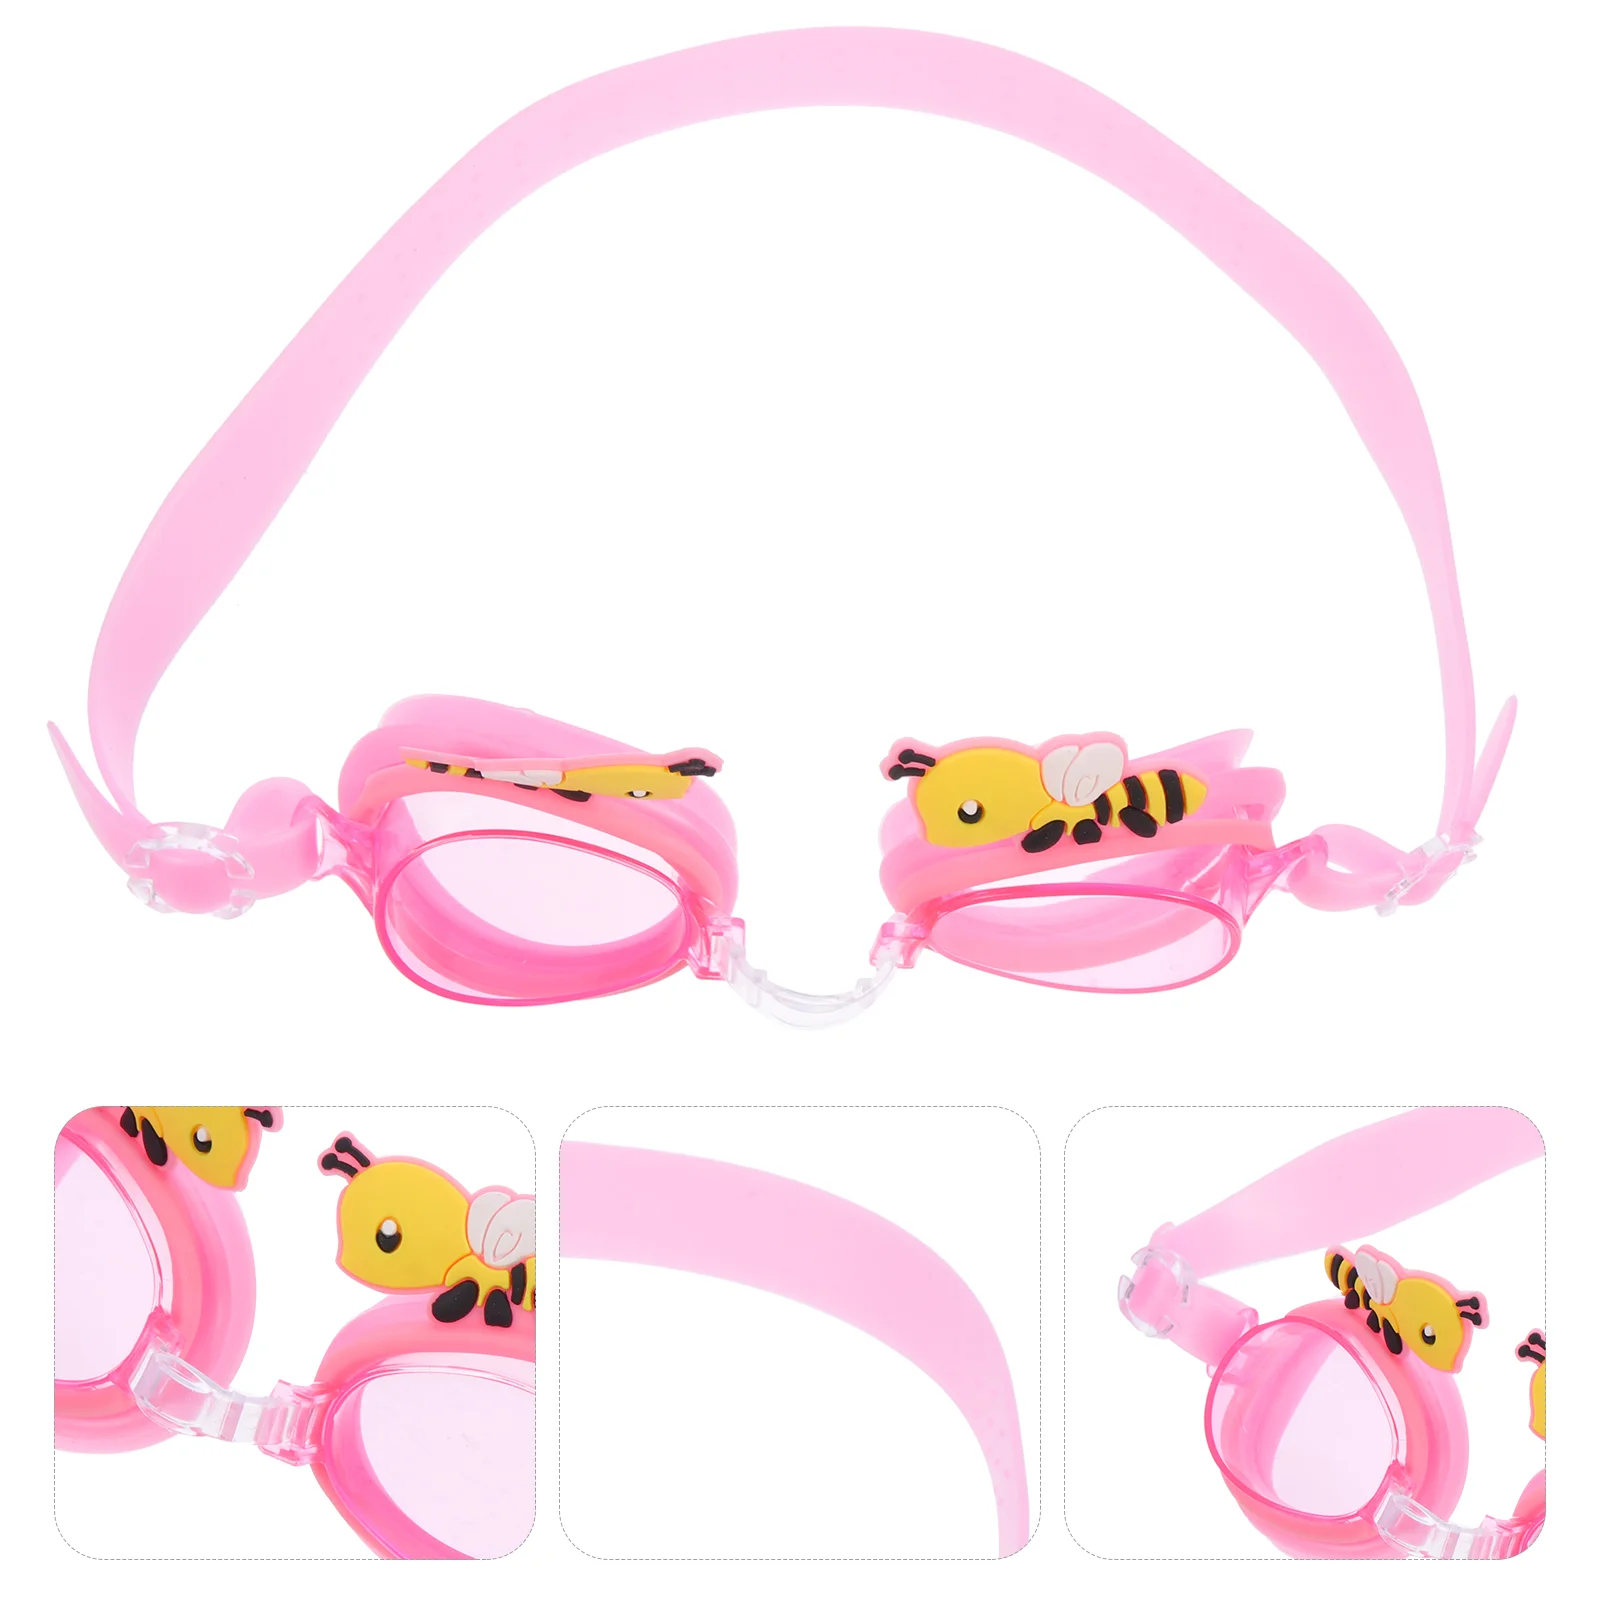 Bee Swimming Goggles Swimming Goggless for Toddlers Cartoon Universal Anti Fog Lightweight Kids Portable Silica Gel Supply 4 pcs packing box travel containers cream jar with lids portable lipglos small silica gel sample plumping gloss